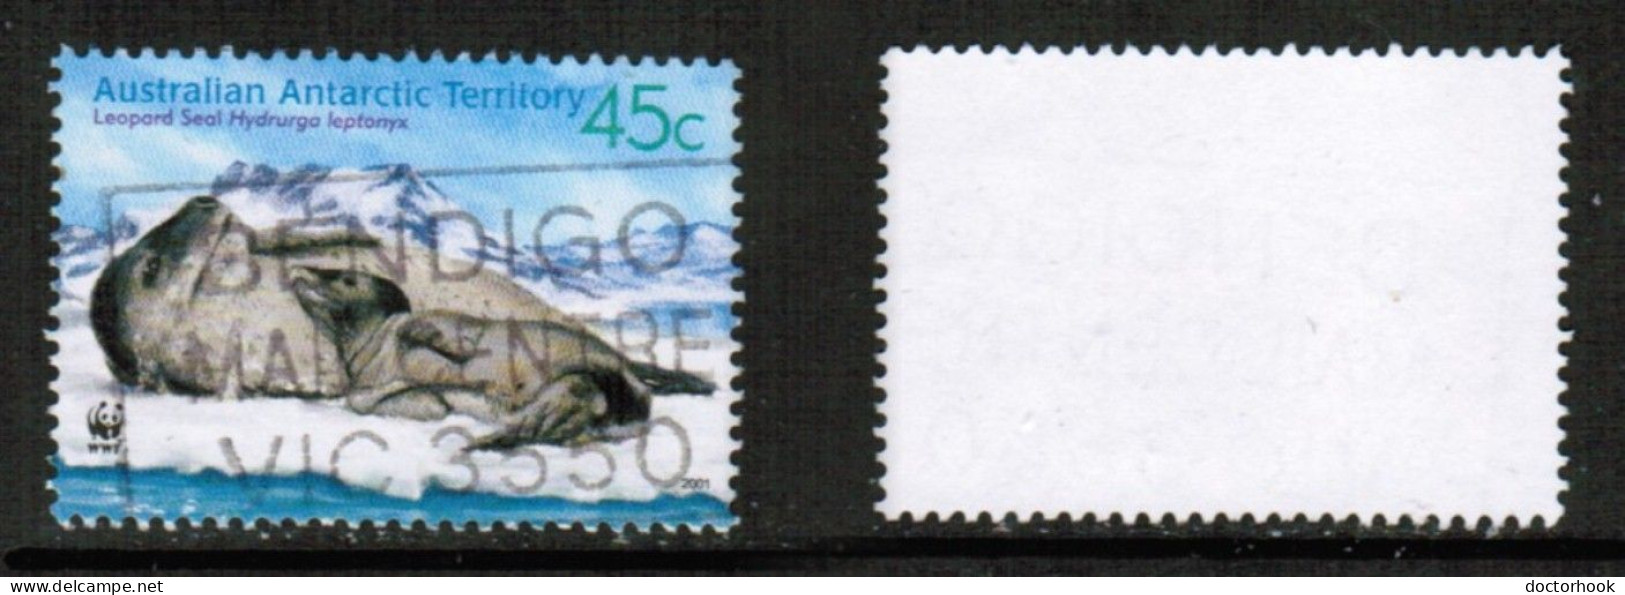 AUSTRALIAN ANTARCTIC TERRITORY   Scott # L 118a USED (CONDITION AS PER SCAN) (Stamp Scan # 930-11) - Oblitérés